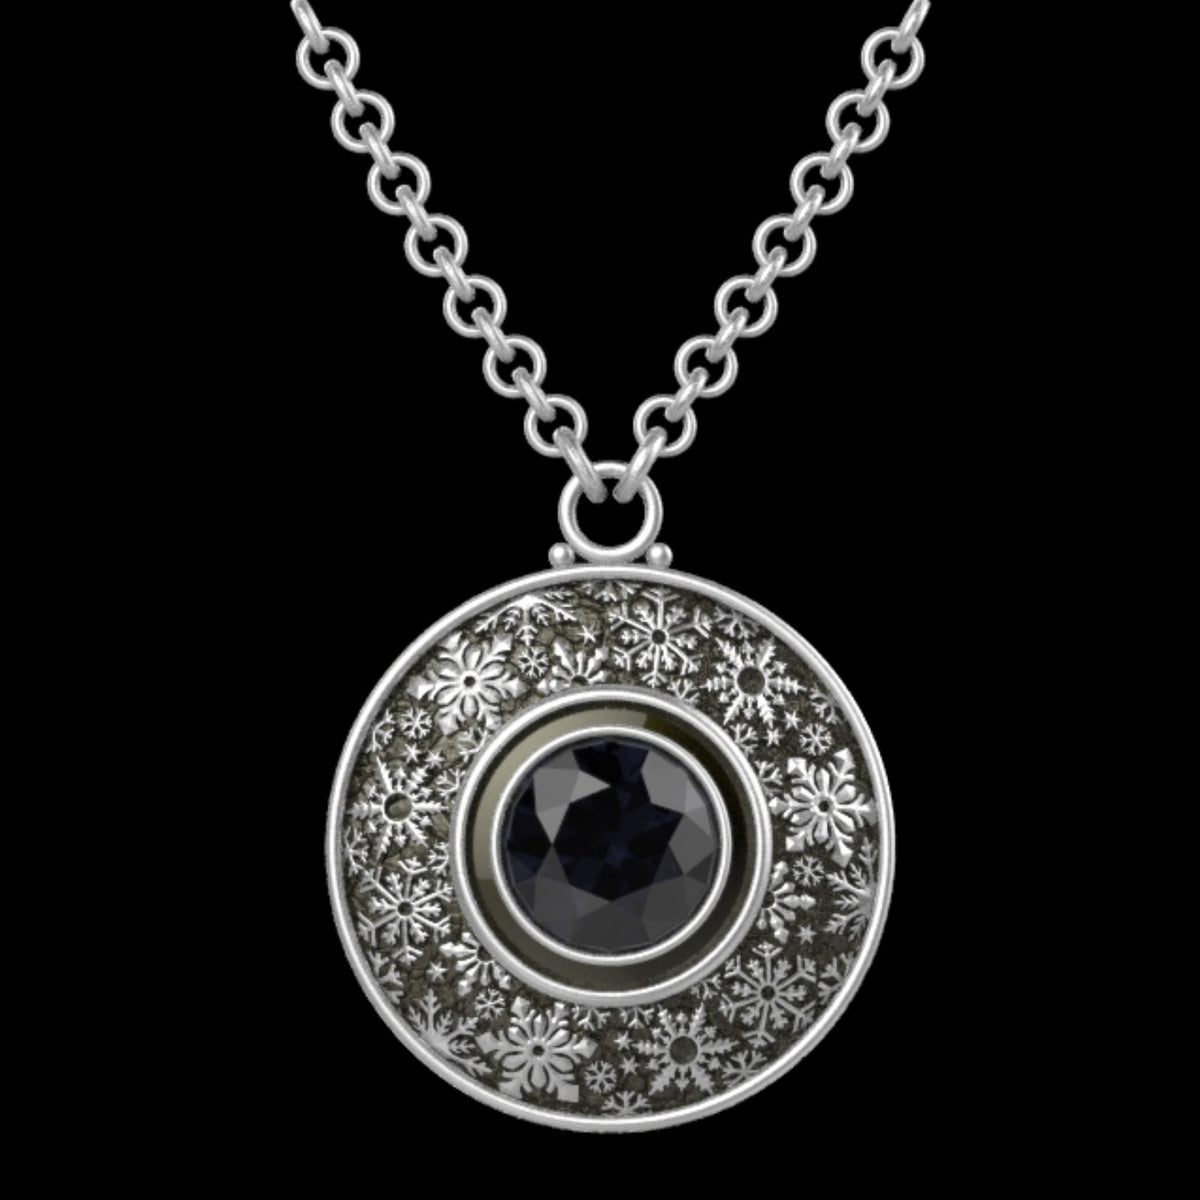 WINTER DRIFT PENDANT NARROW in SILVER OR CONTINUUM with 8mm Gemstone - Starting at $179